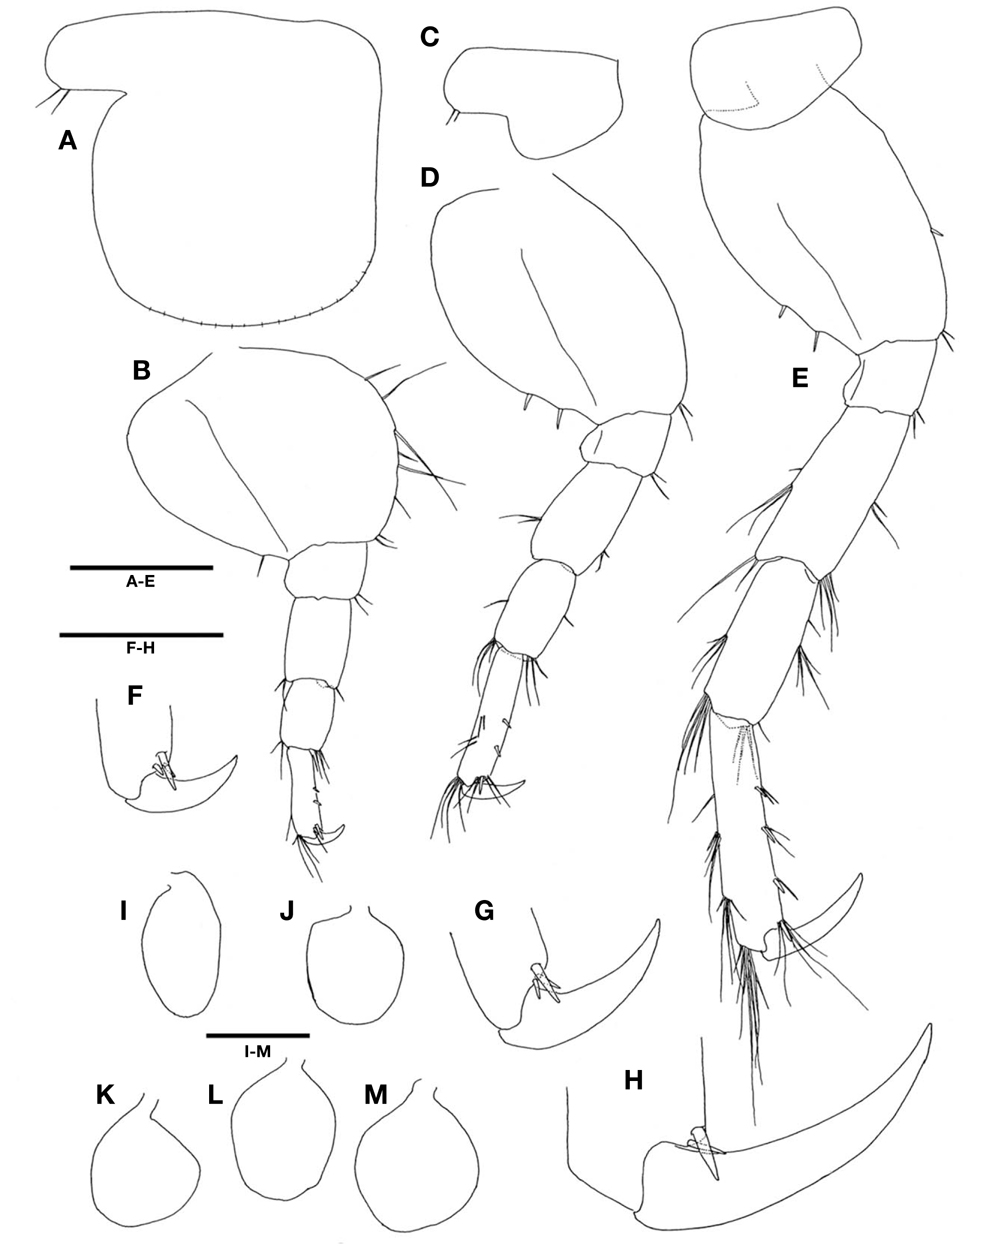 Ampithoe akuolaka  Barnard, 1970, male (A-M). A, Coxa 5; B, Pereopod 5; C, Coxa 6; D, Pereopod 6; E, Pereopod 7; F-H, Distal spines of propodus on pereopods 5-7, setae omitted; I-M, Coxal gills of gnathopod 2-pereopod 6. Scale bars: A-E, I-M=0.5 mm, F-H=0.2 mm.